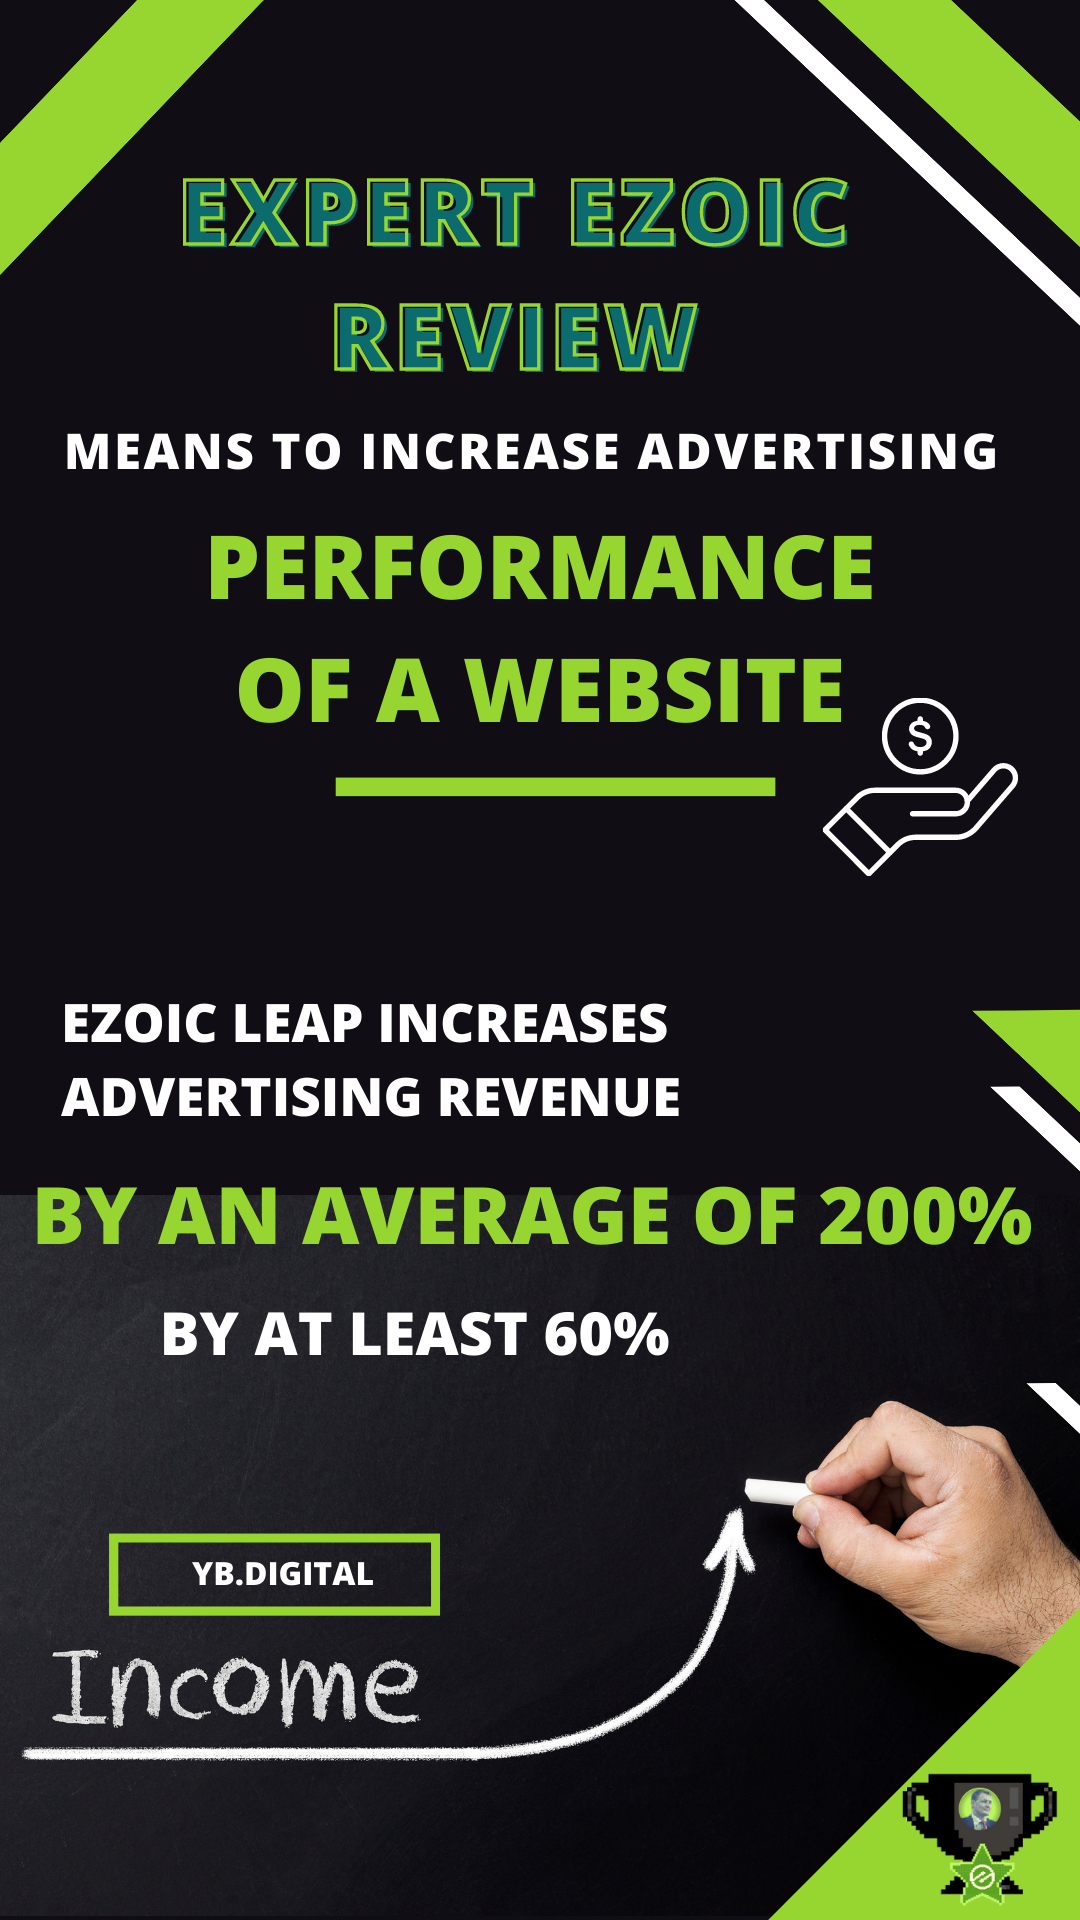 Ezoic is a comprehensive platform that provides publishers and bloggers with a complete set of options to monetize and improve their websites.